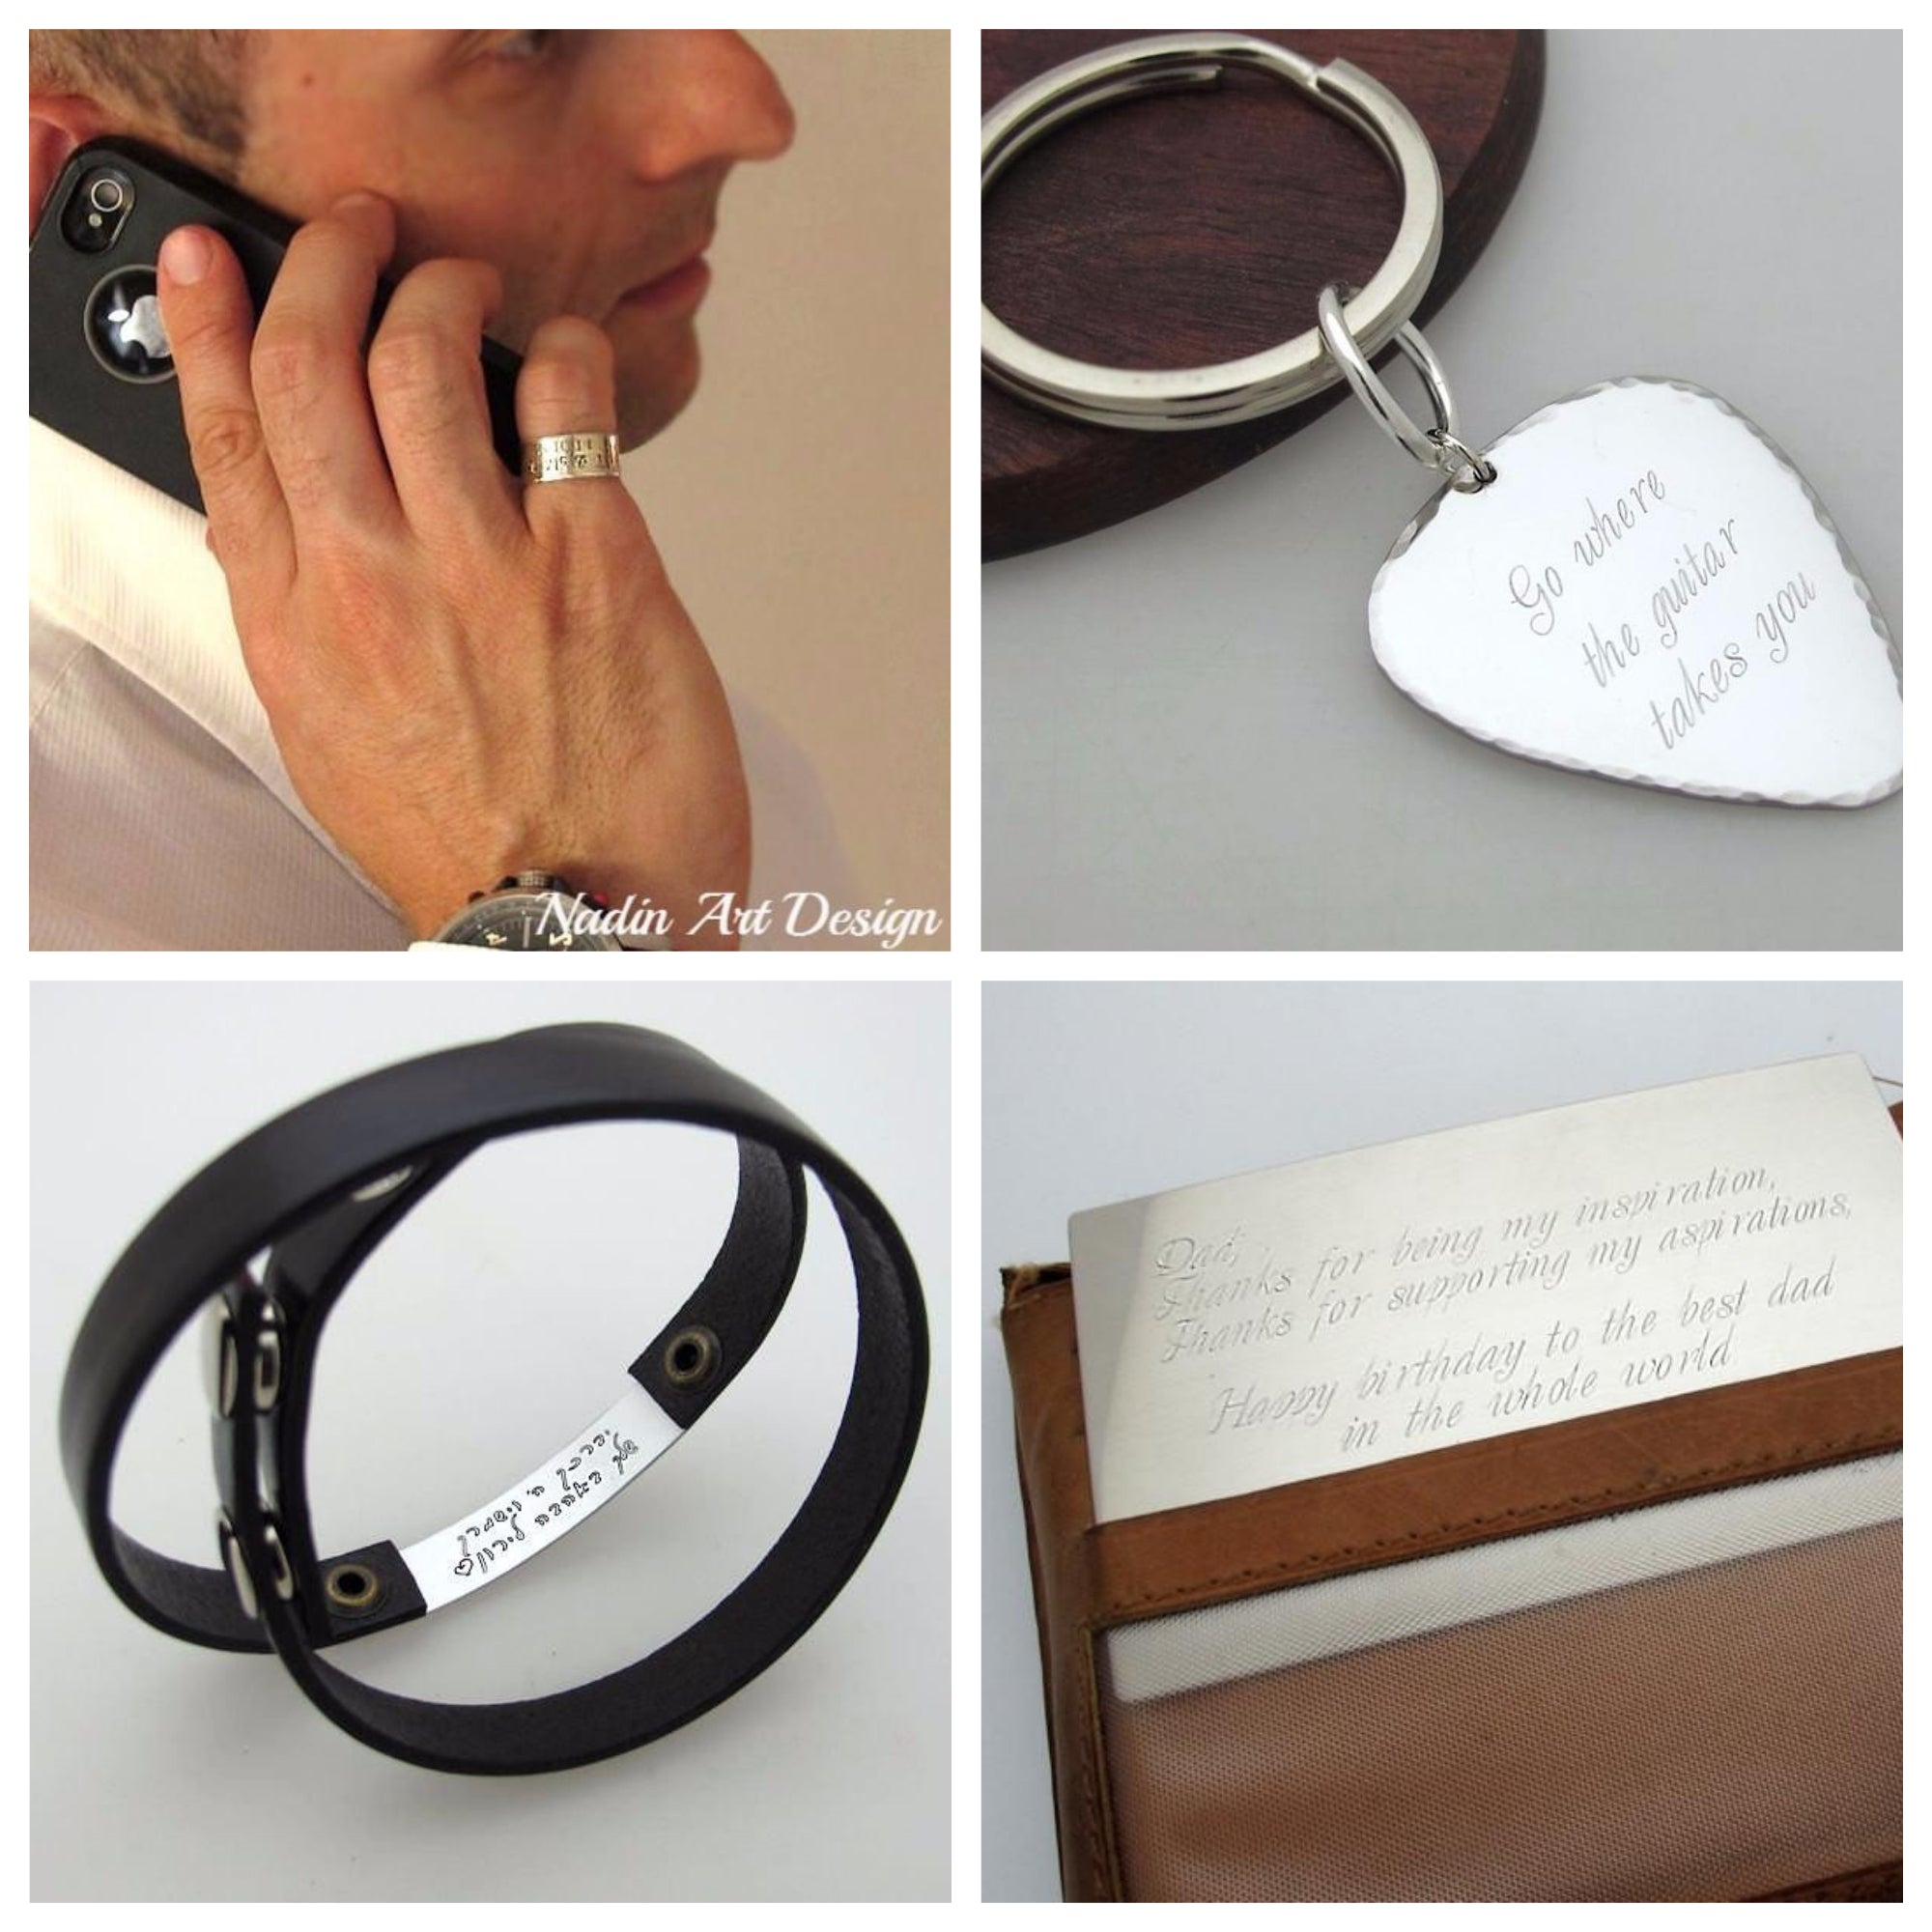 Personalized Gift ideas | Personalized gifts, Personalized gifts for men,  Beauty products gifts